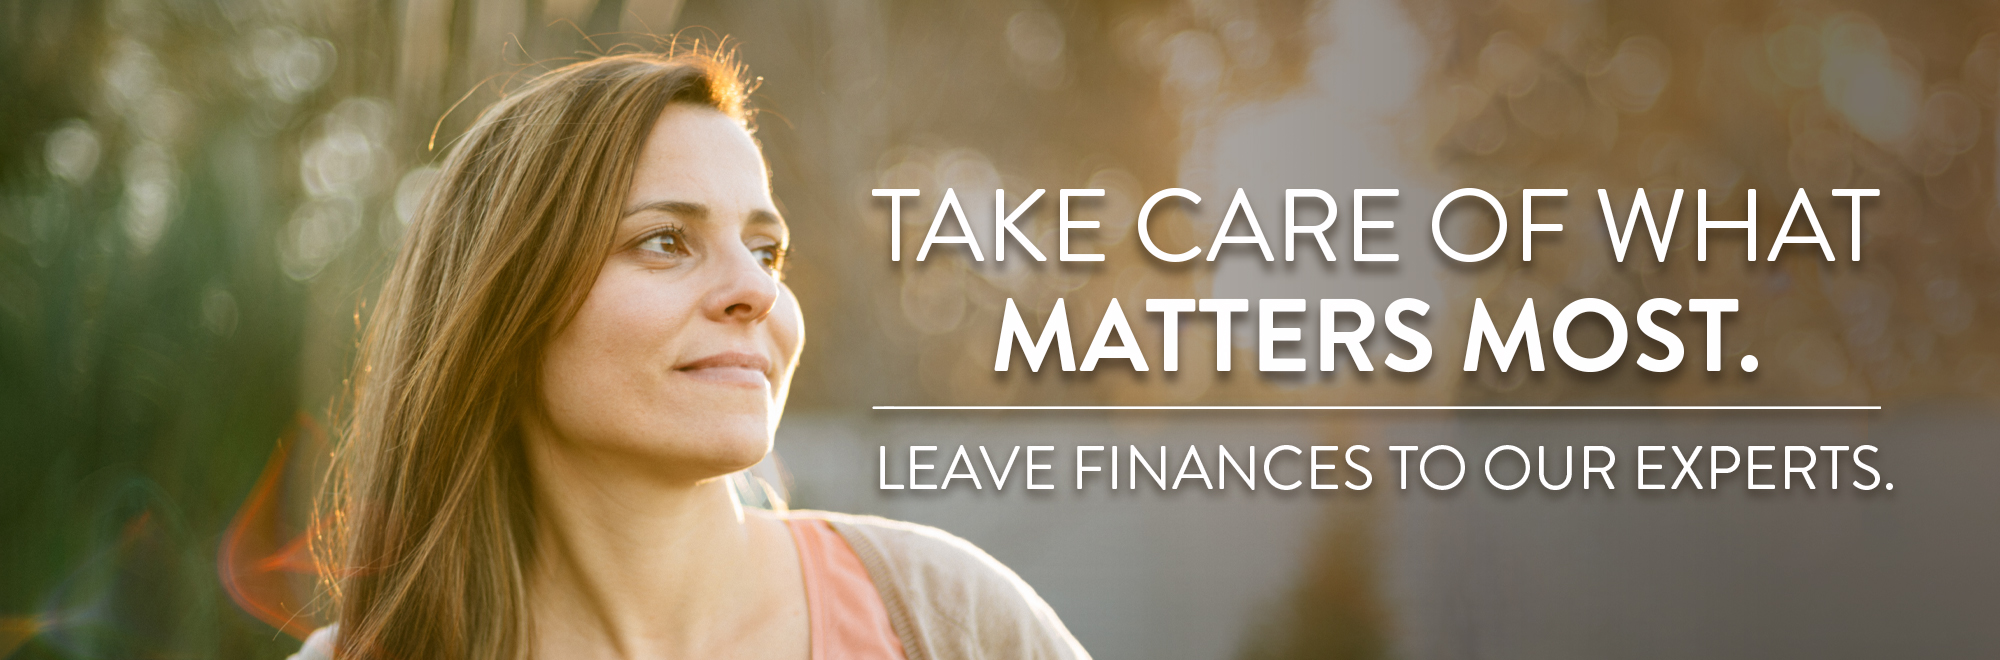 Take care of what matters most. Leave finances to our experts. 